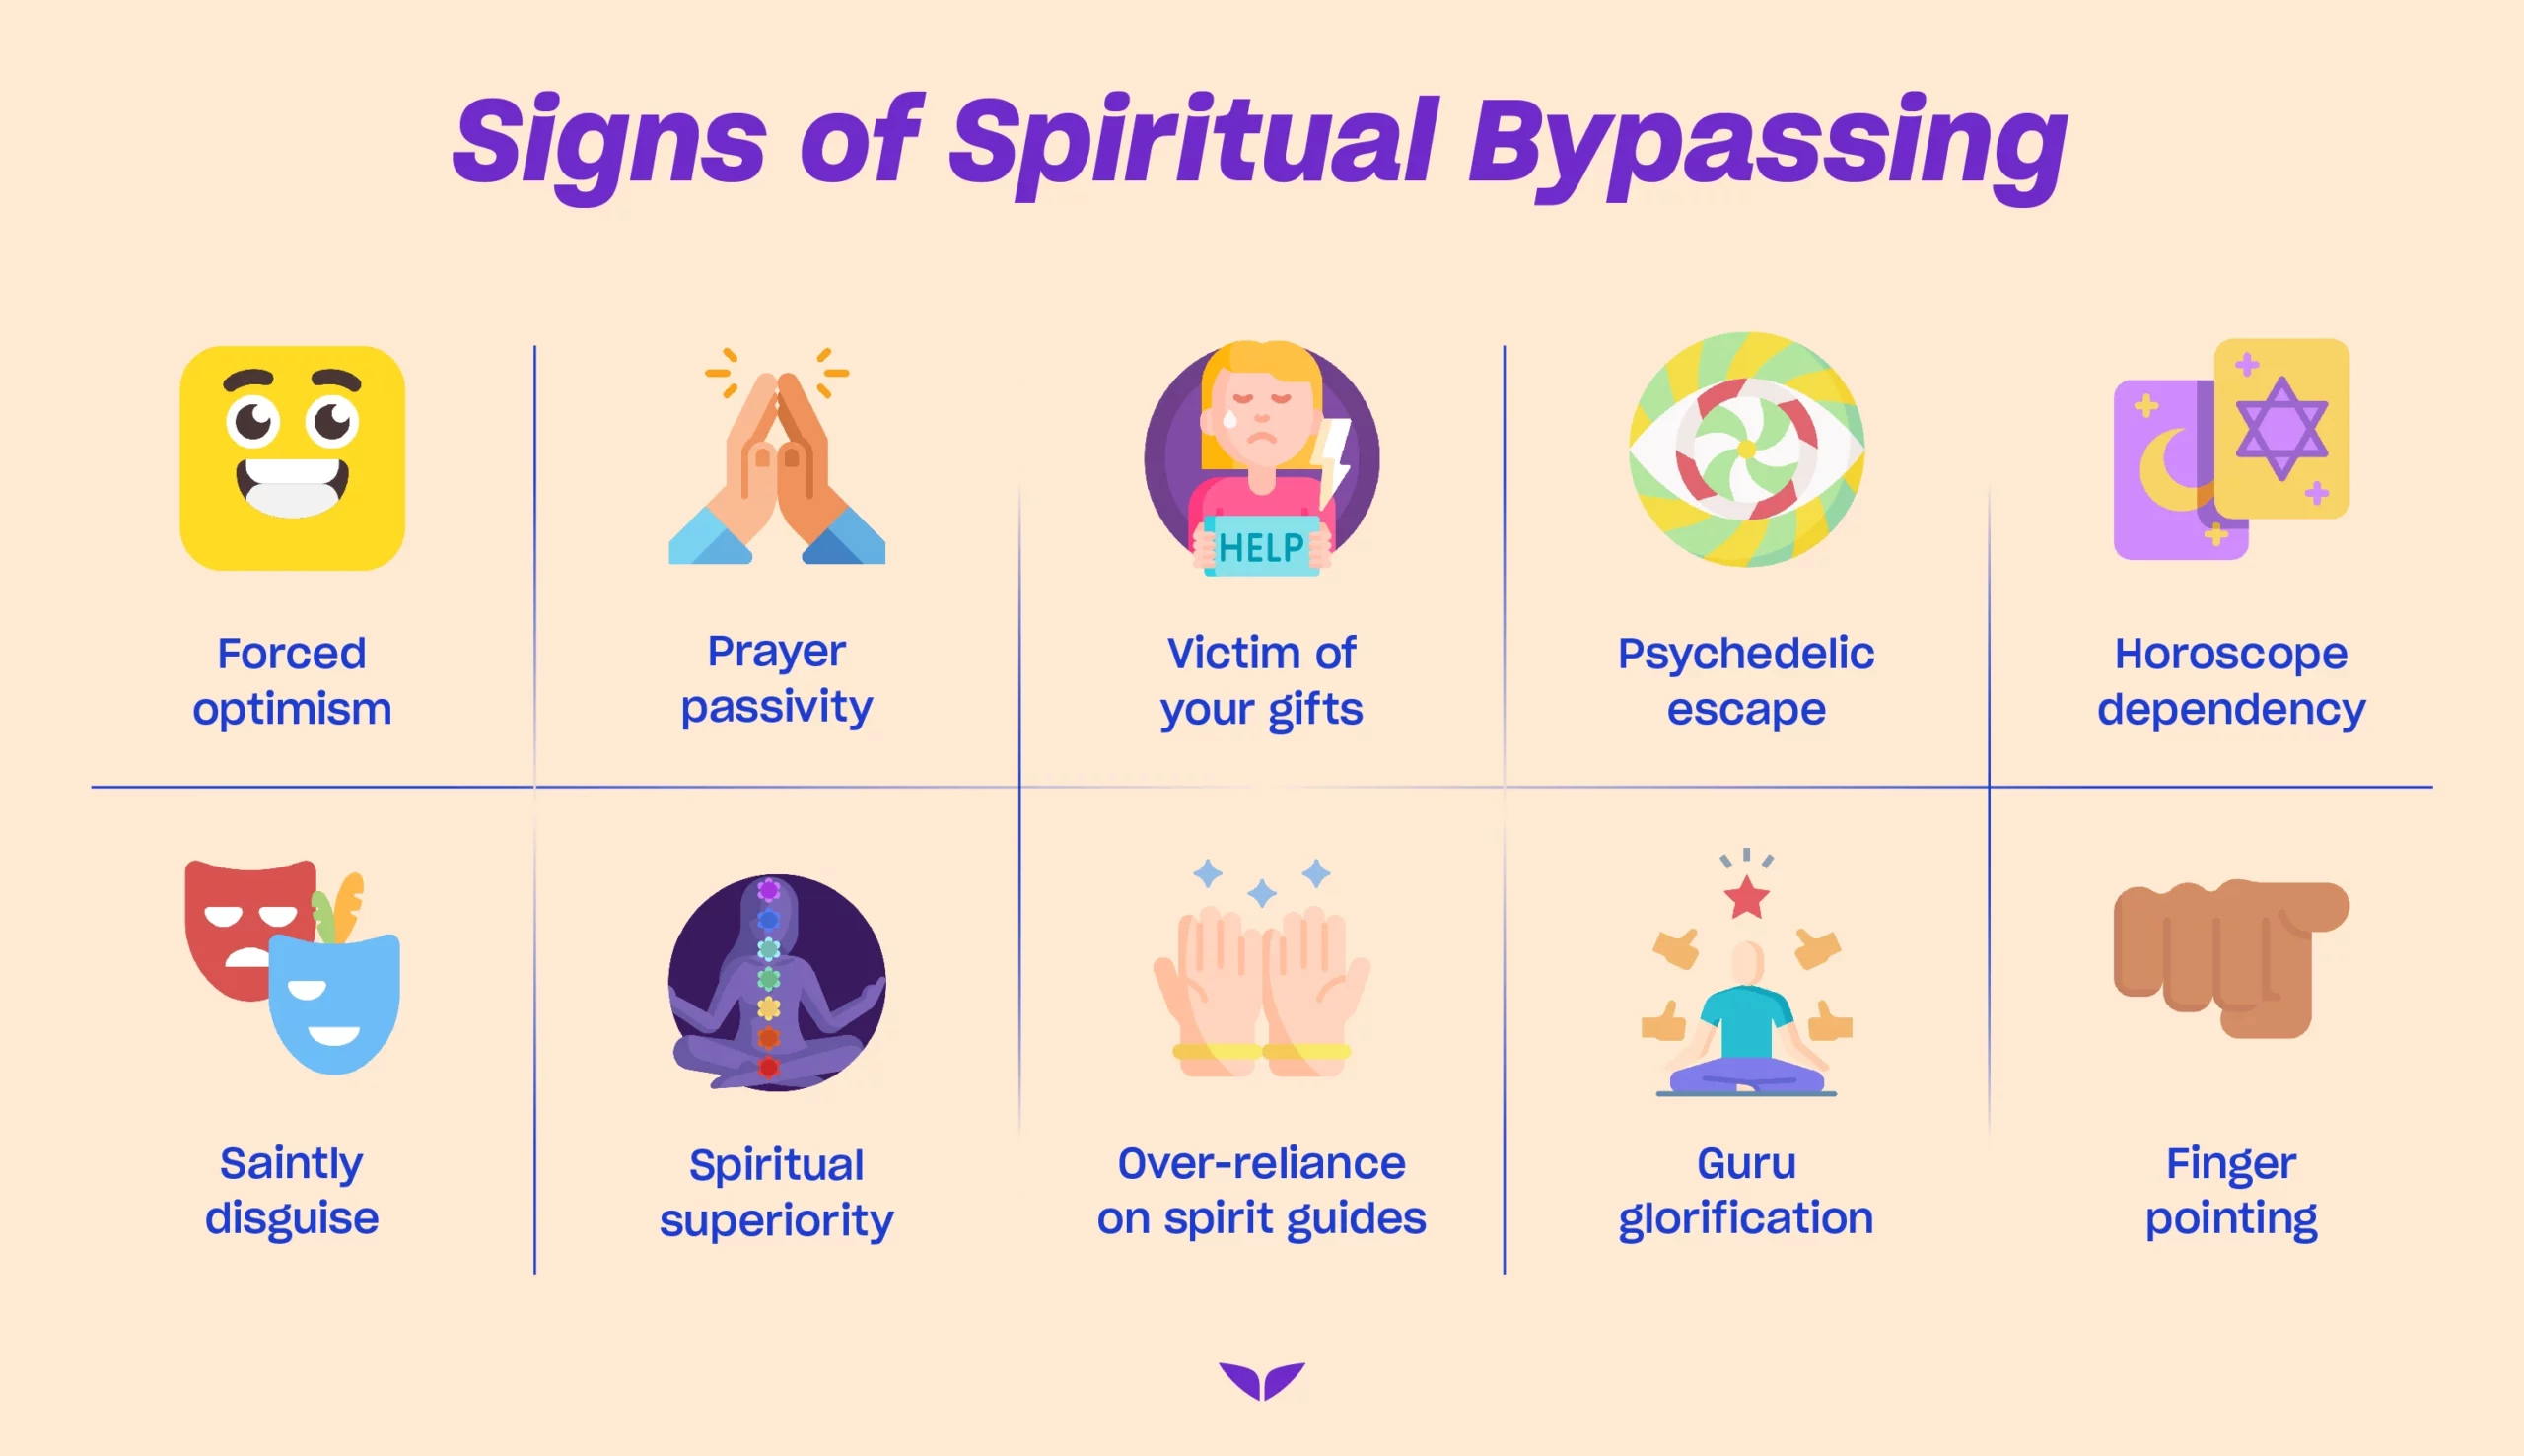 Signs of spiritual bypassing